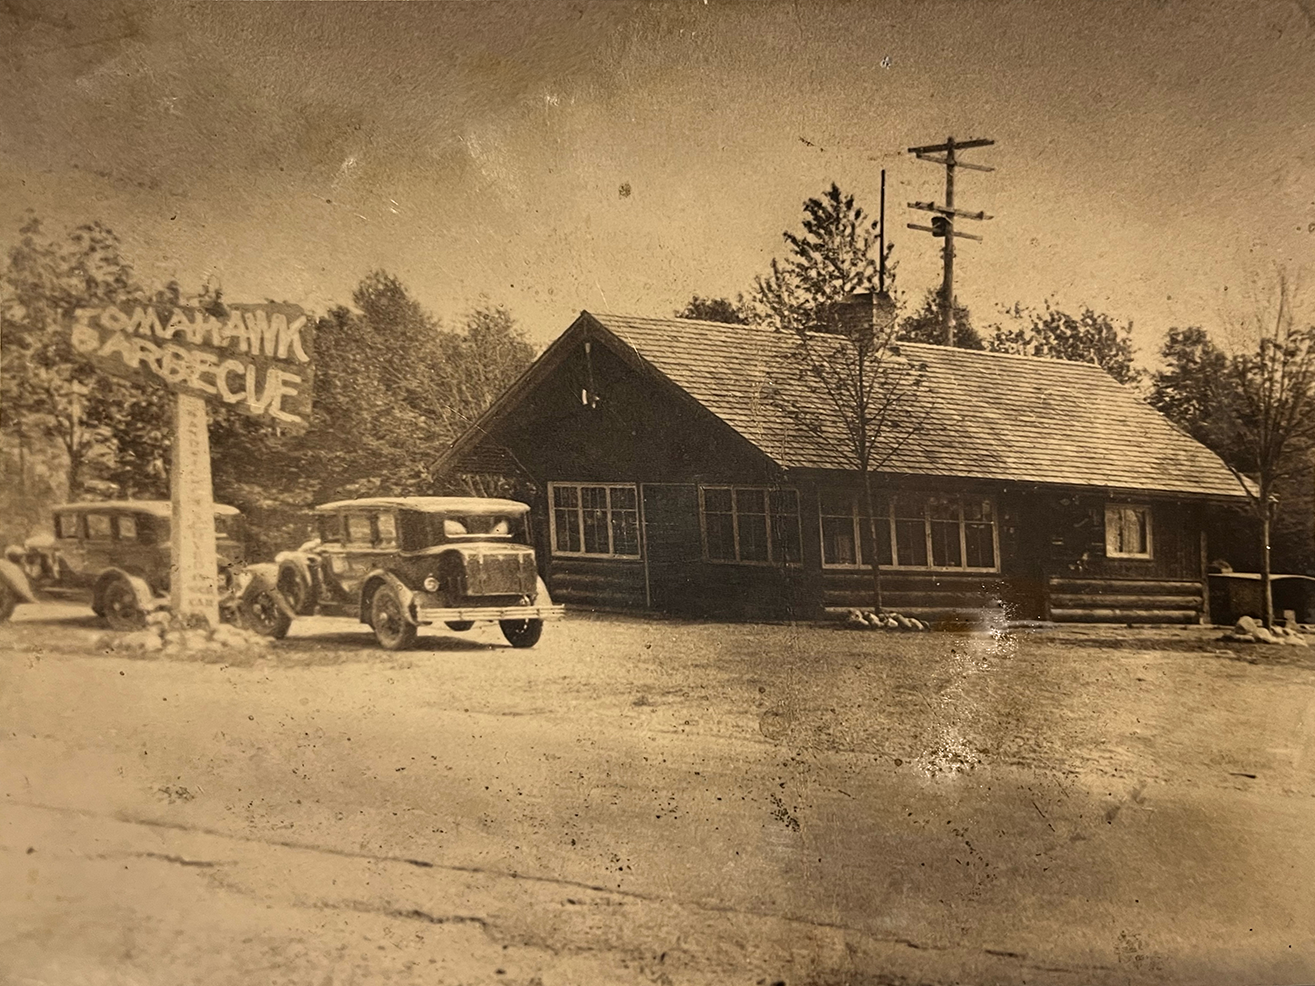 Tomahawk restaurant in the early 1920s